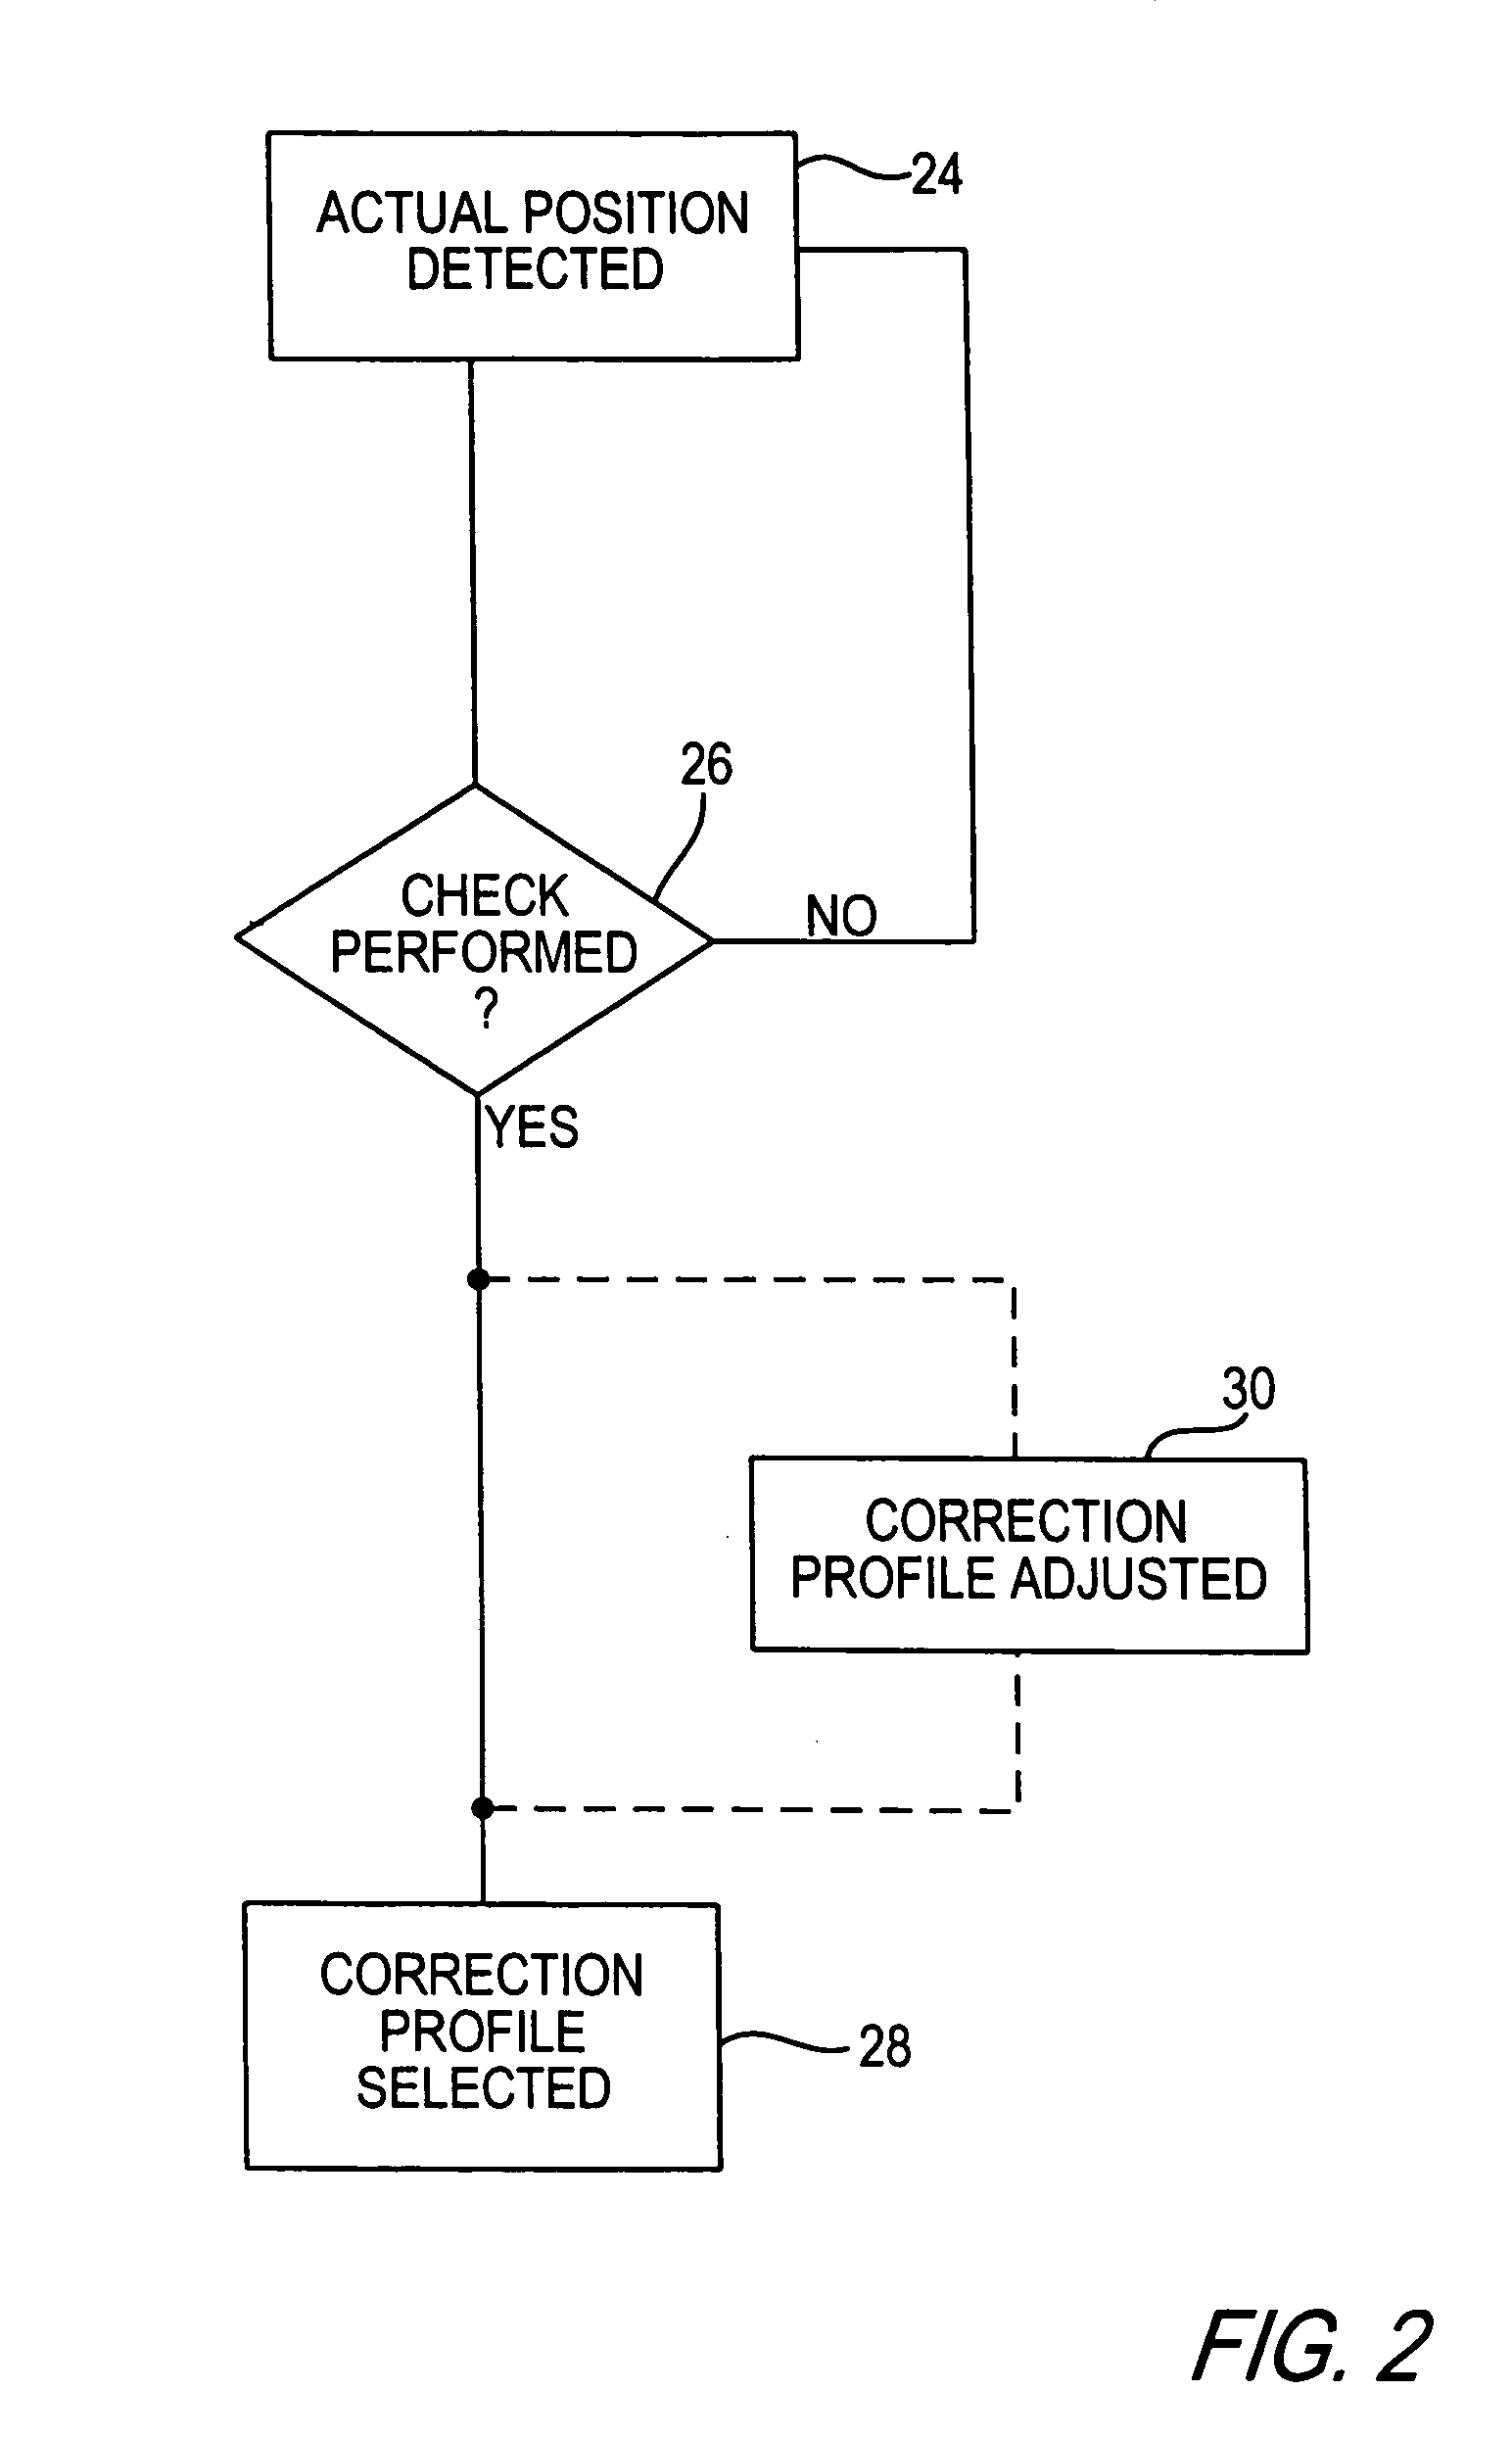 Method and device for correcting the positional deviation of a conveyed item by adjusting the cylinder's angle rotation relative to the conveyed item